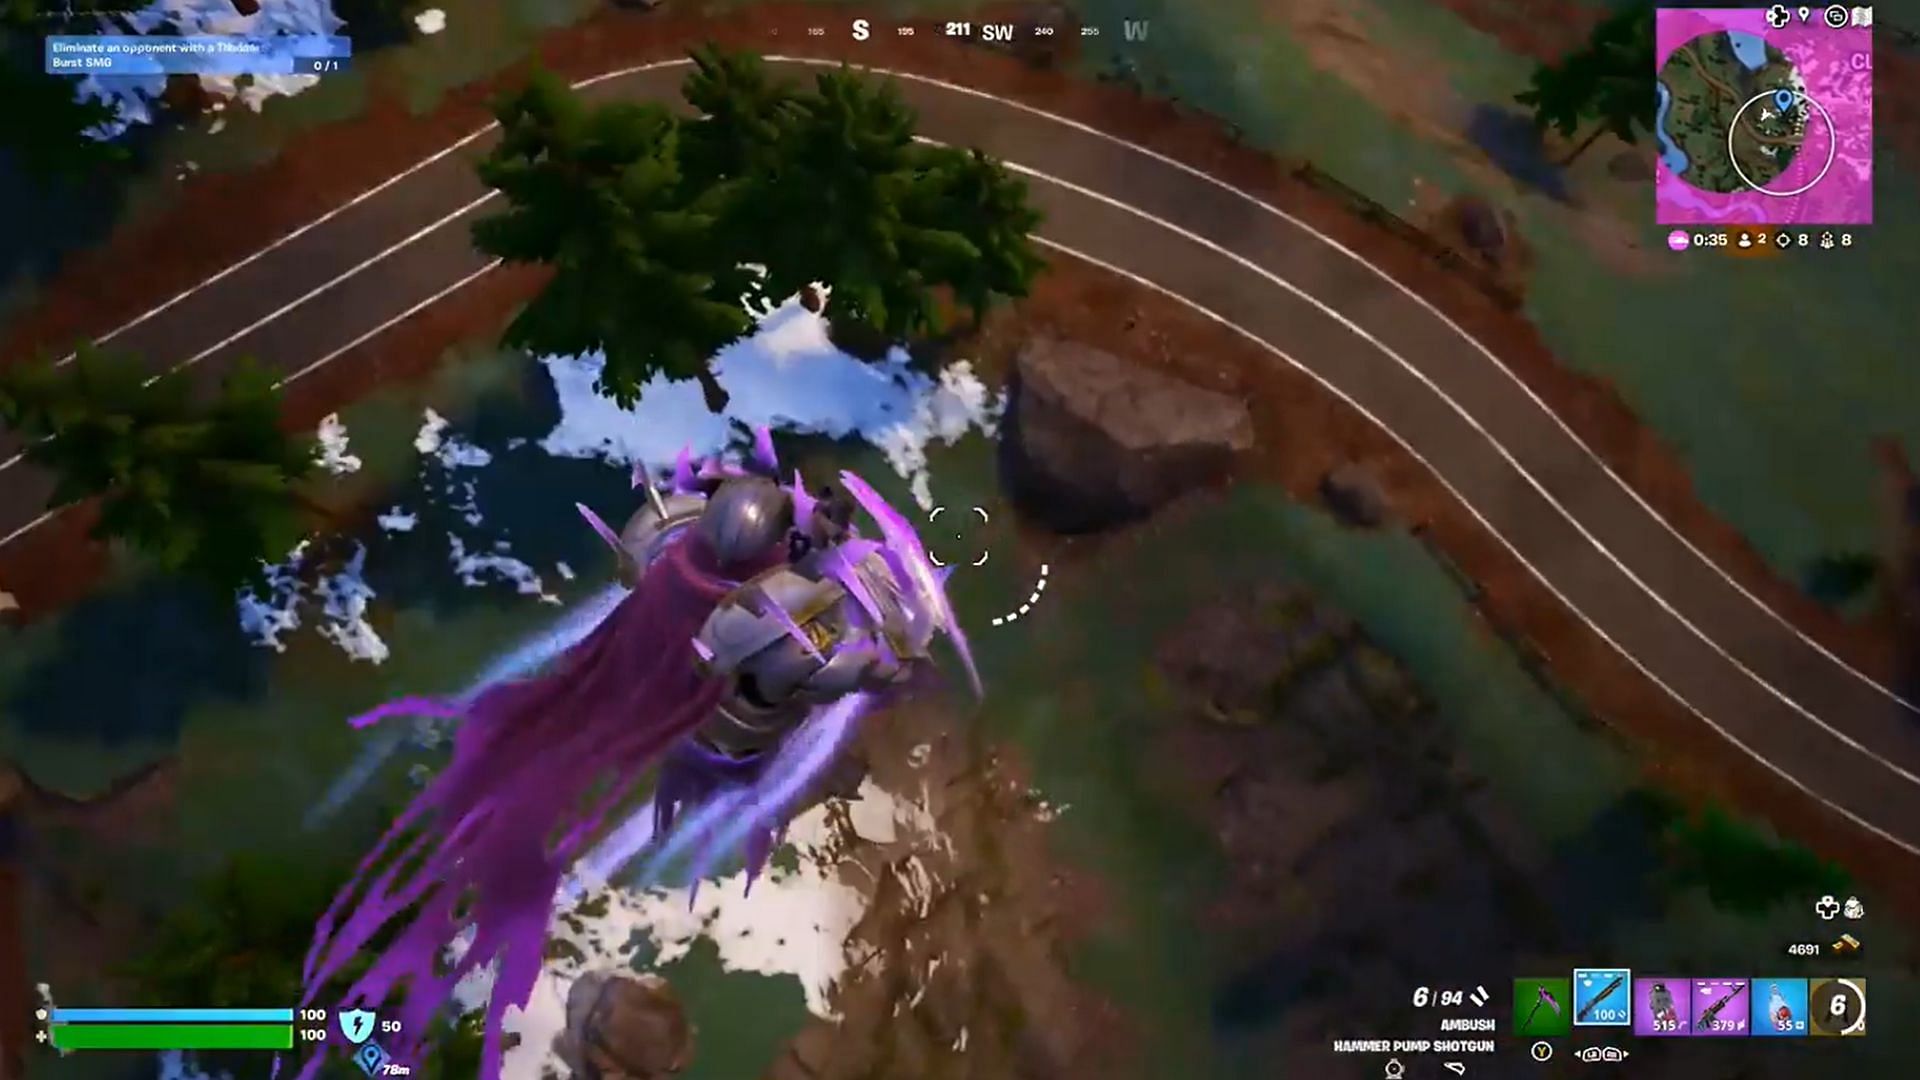 Fortnite player launches surprise attack from above using Teenage Mutant Ninja Turtle Mythic, community lauds their flawless Victory Royale